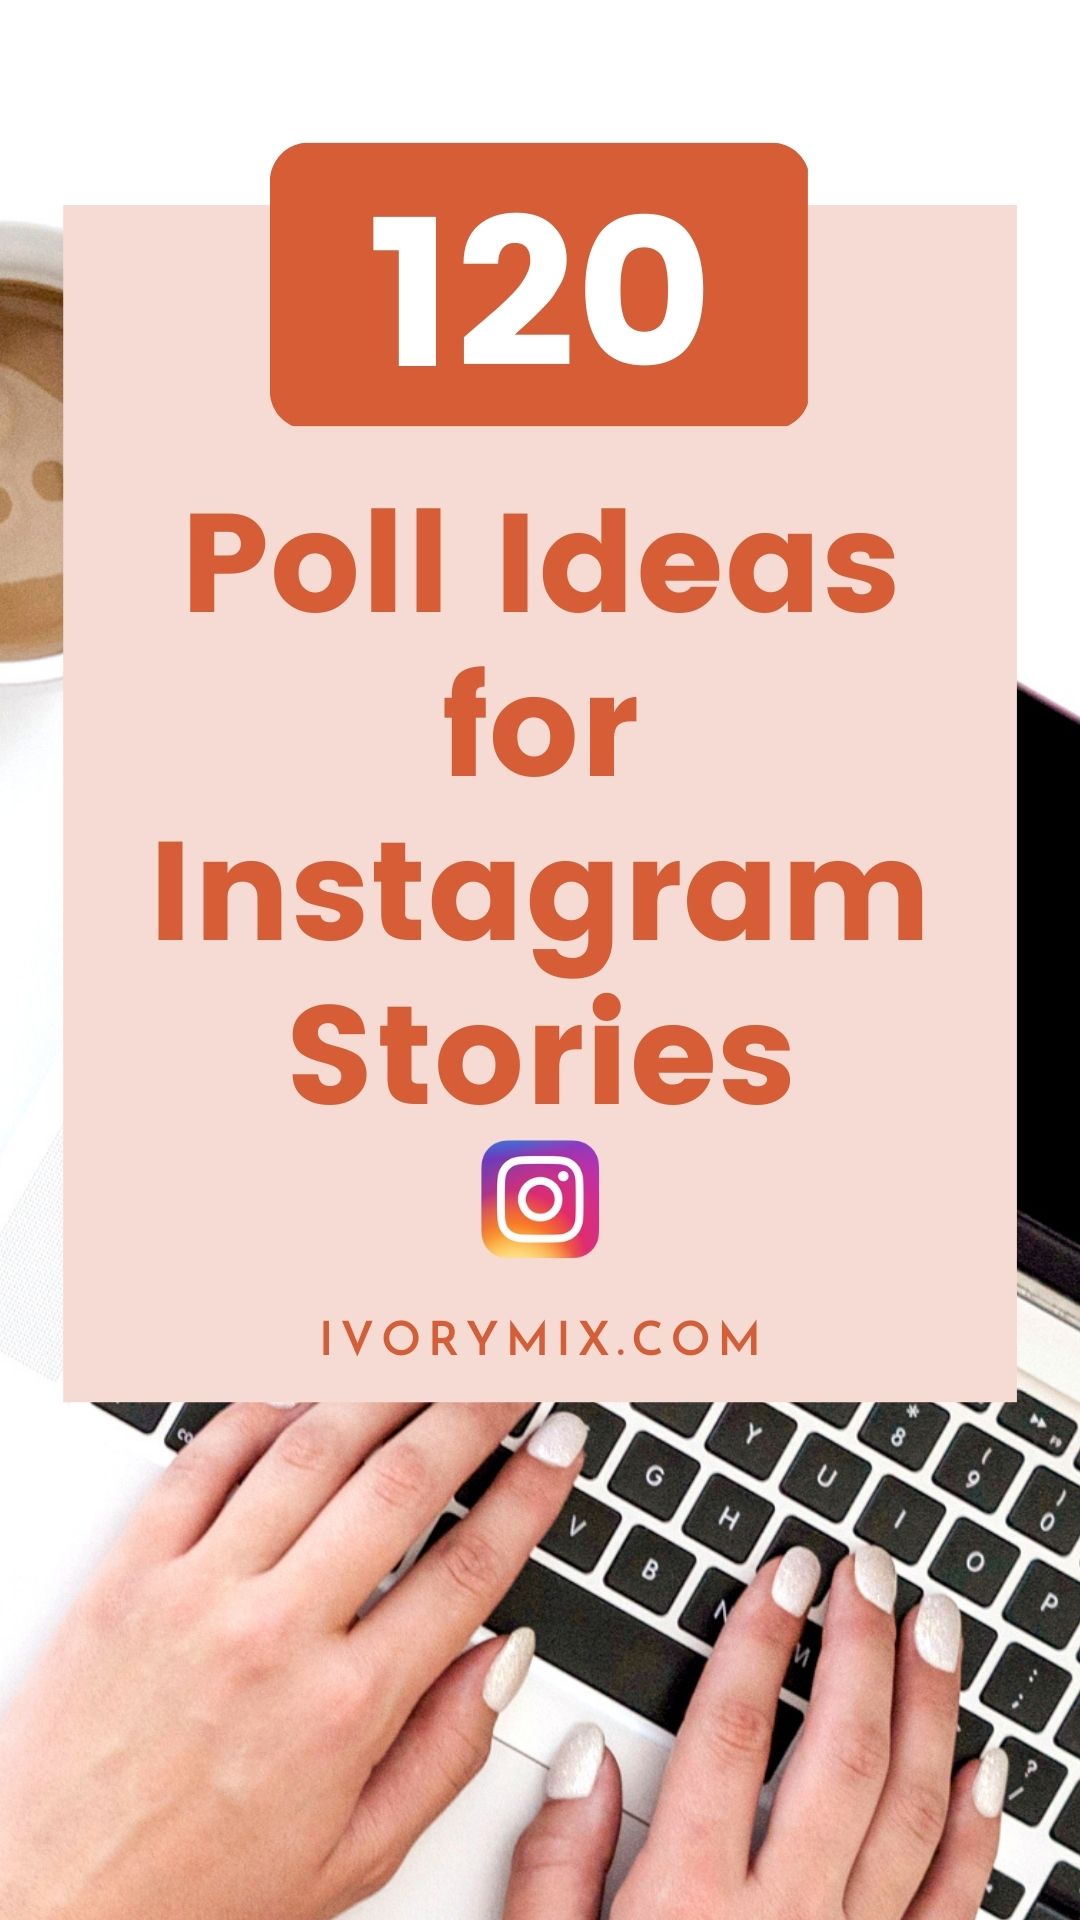 MONTHLY FAVOURITES INSTAGRAM STORY TEMPLATE  Instagram story template,  Monthly favorites, Instagram story questions